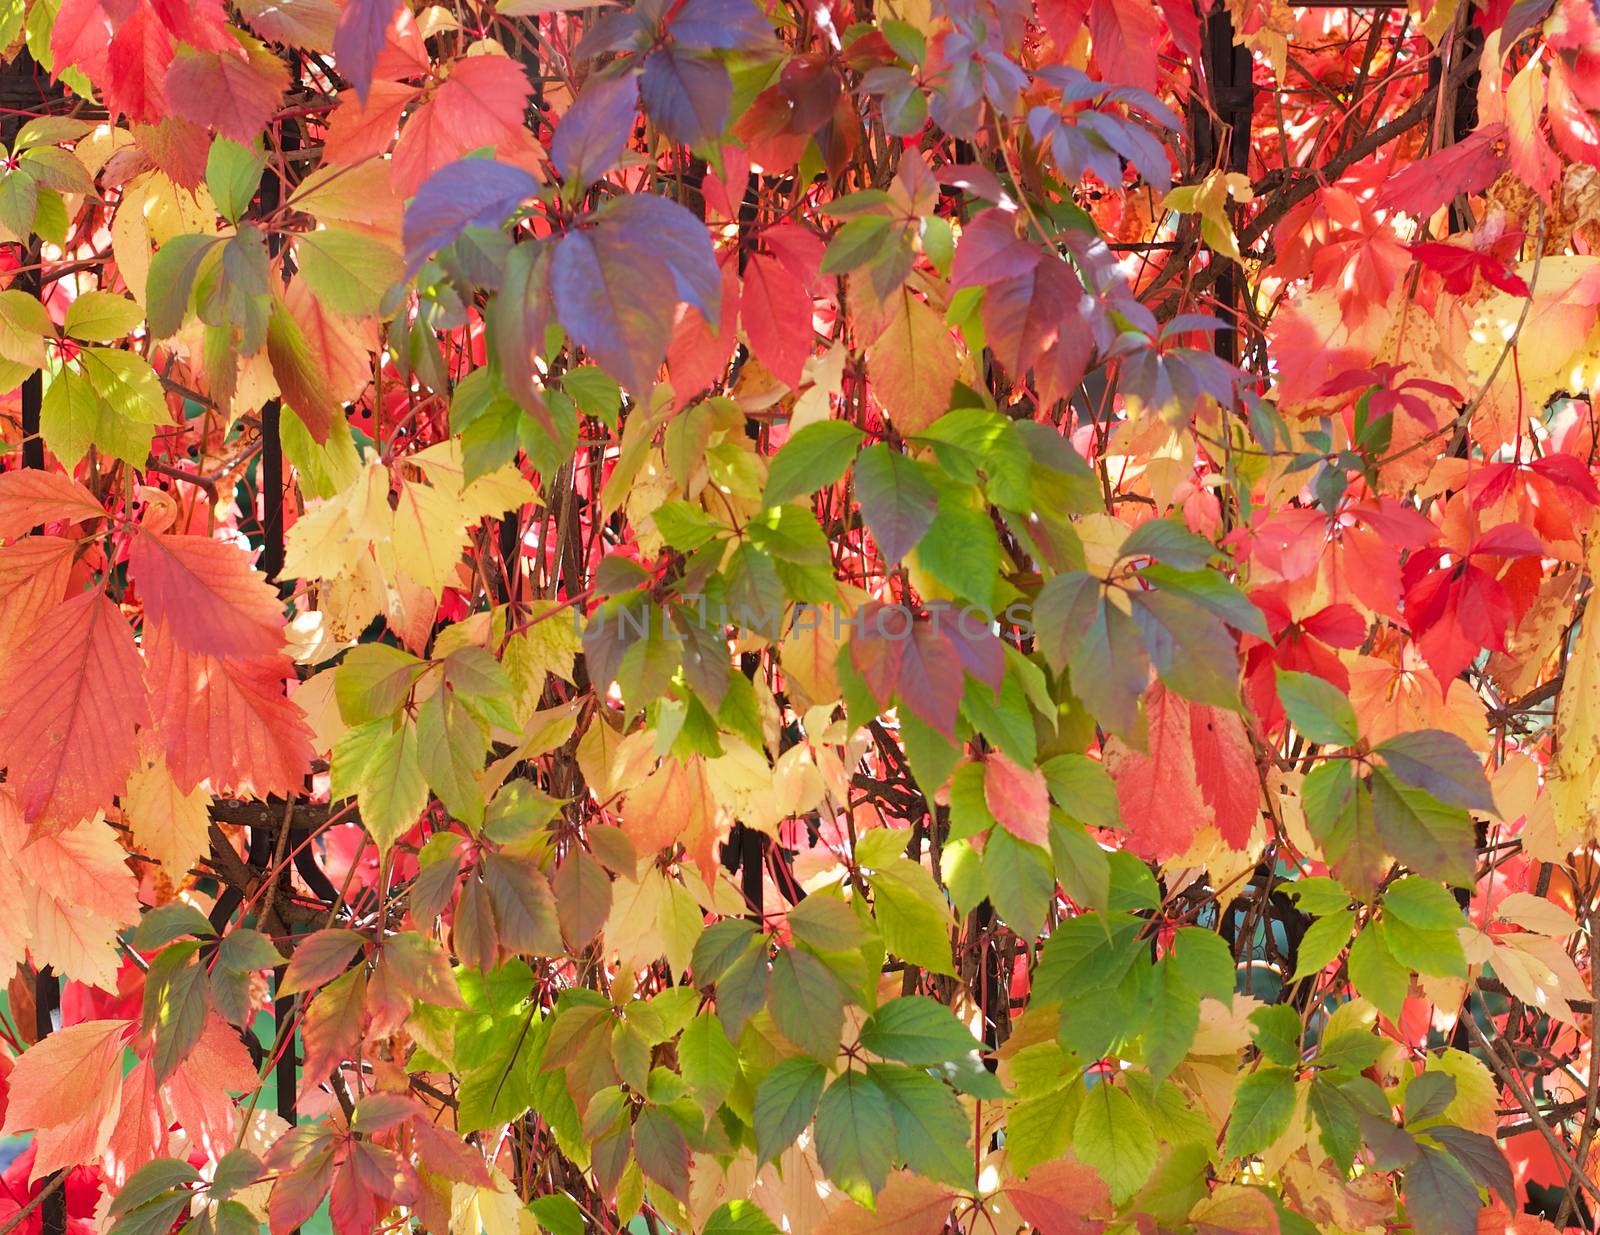 Background of Beauty Variegated Autumn Wild Grape Leaves closeup Outdoors. Selective Focus